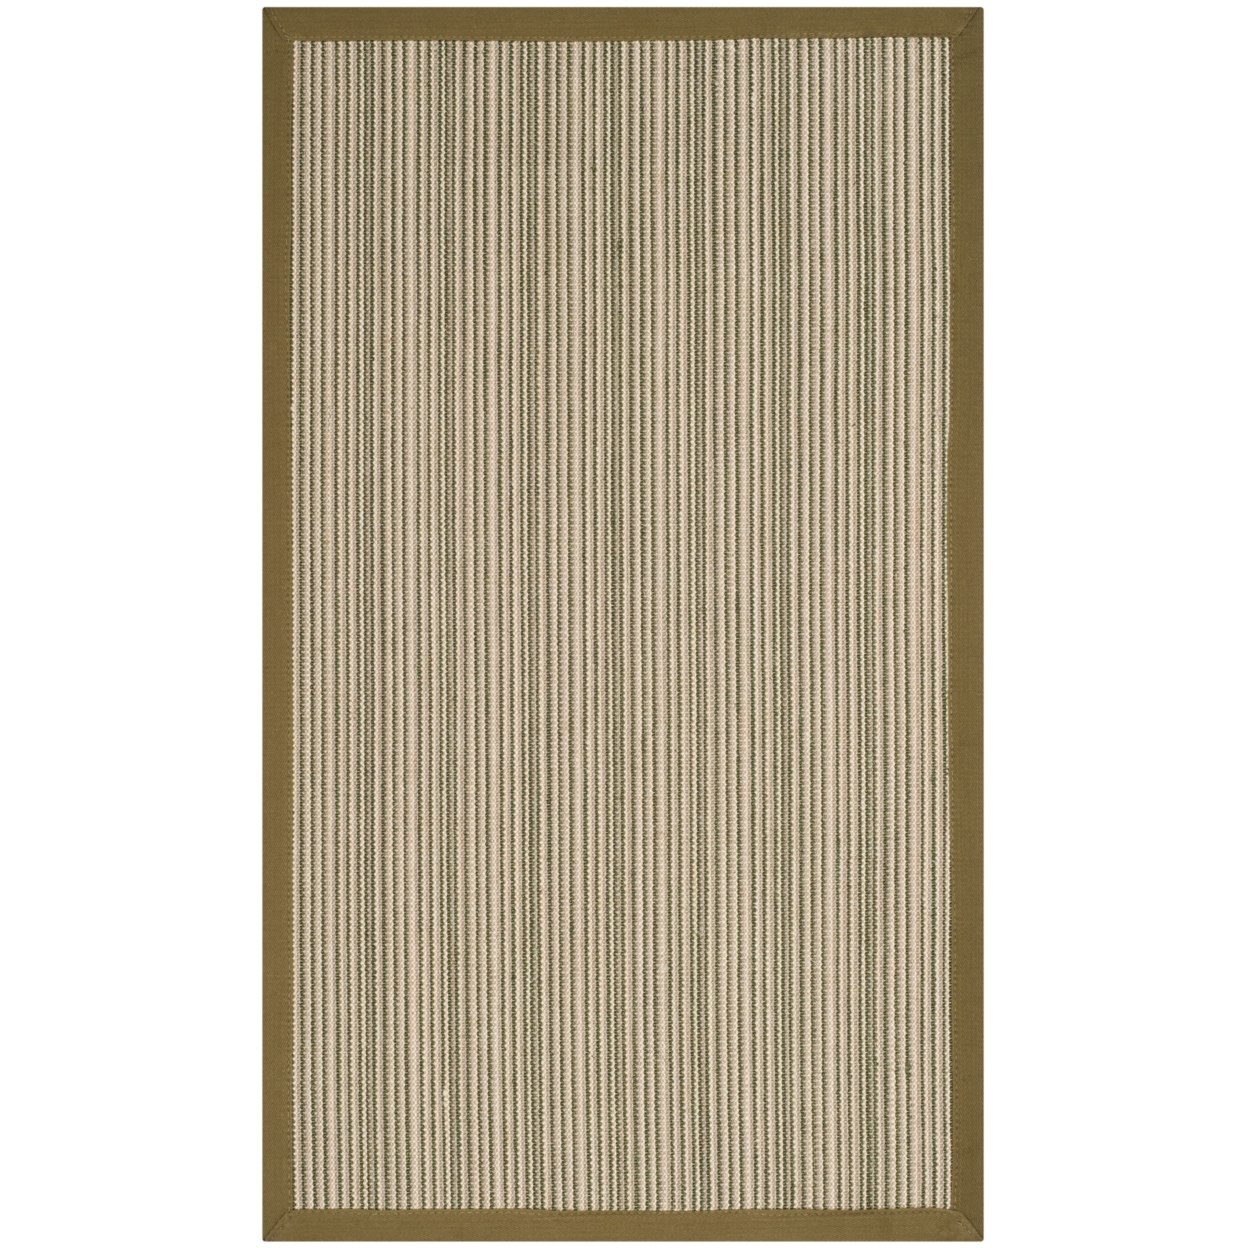 SAFAVIEH Natural Fiber Collection NF132A Multi/Green Rug - 3' X 5'